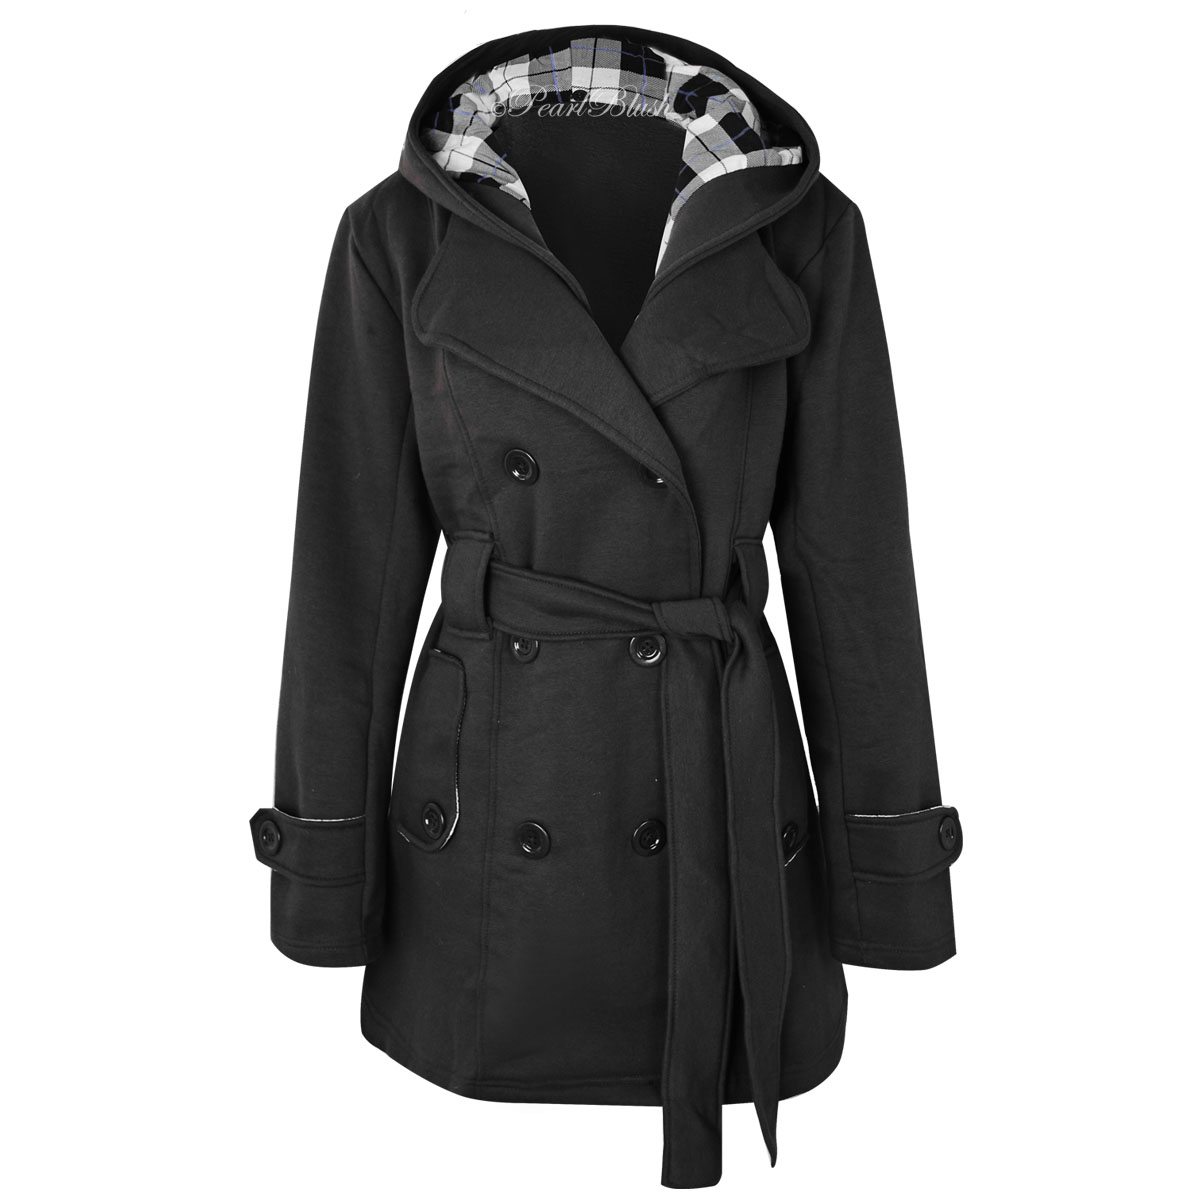 NEW WOMENS LADIES MAC COAT JACKET PLUS SIZE WARM DOUBLE BREASTED ...